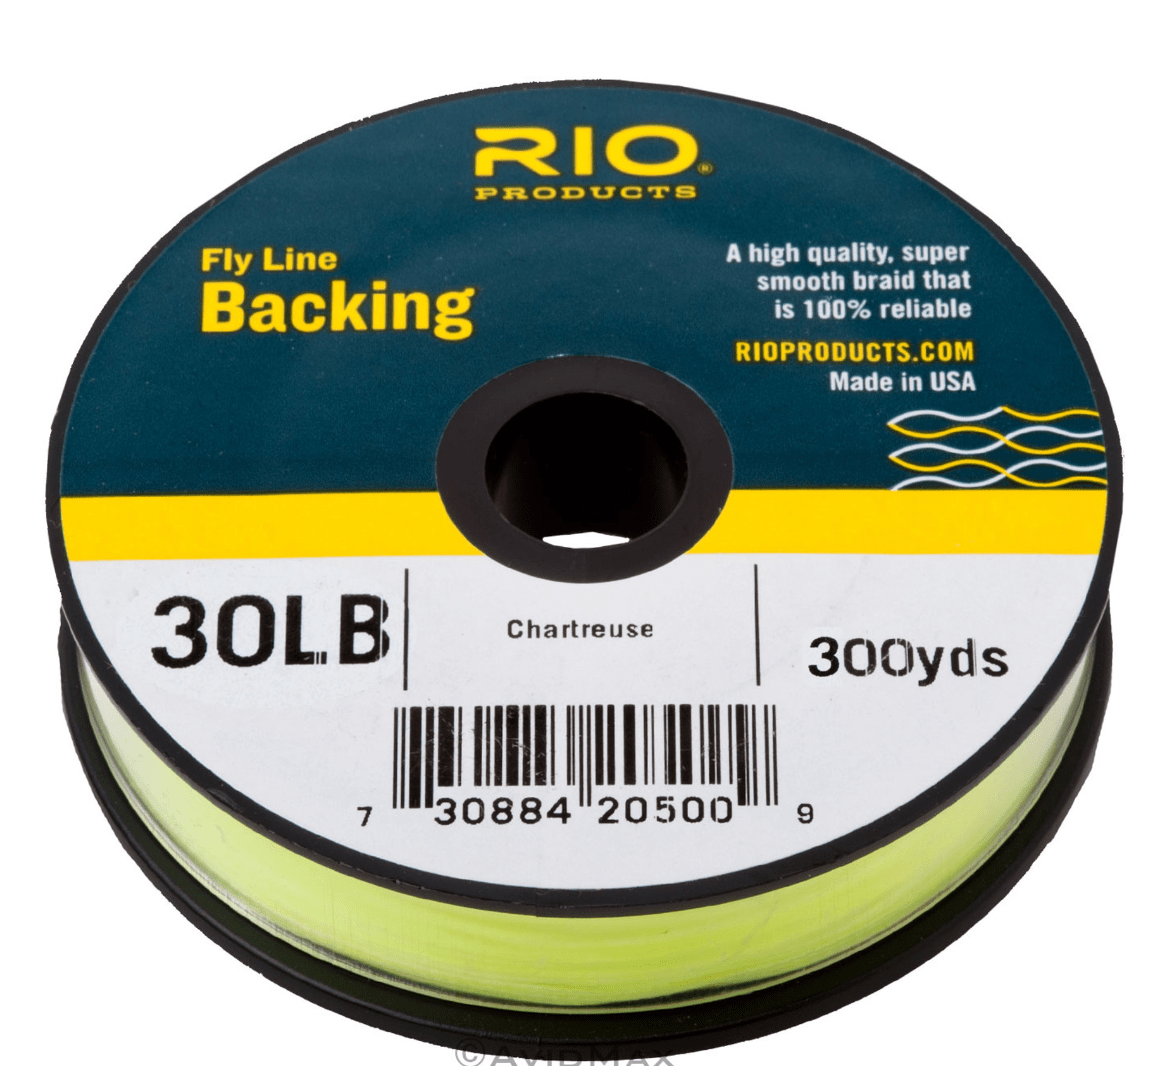 RIO 30 lb Fly Line Backing 300 Yard Spool Chartreuse